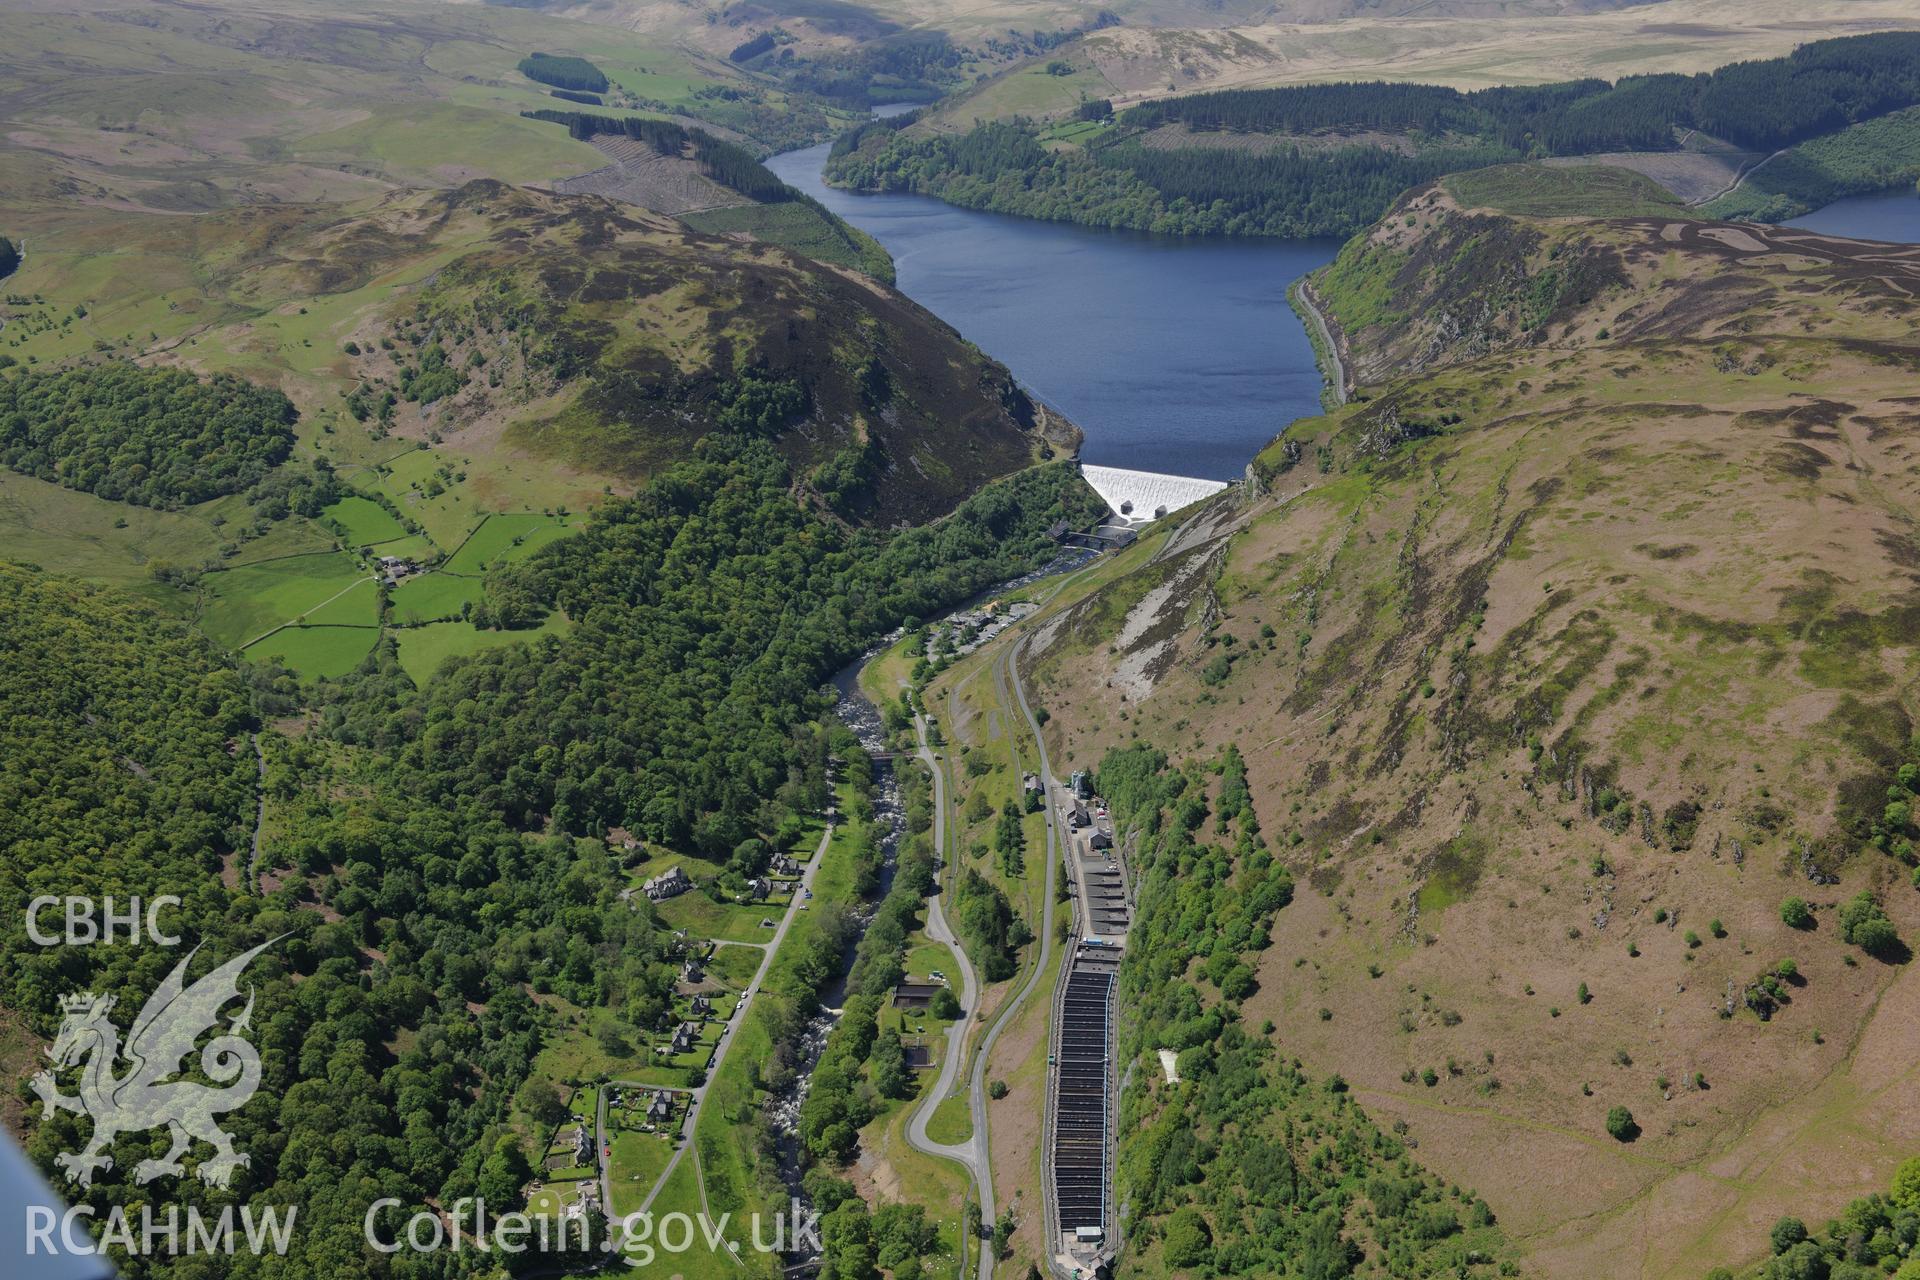 Landscape view of Caban Coch reservoir, dam and Elan Village, Birmingham Corporation Waterworks model village. Oblique aerial photograph taken during the Royal Commission?s programme of archaeological aerial reconnaissance by Toby Driver on 3rd June 2015.